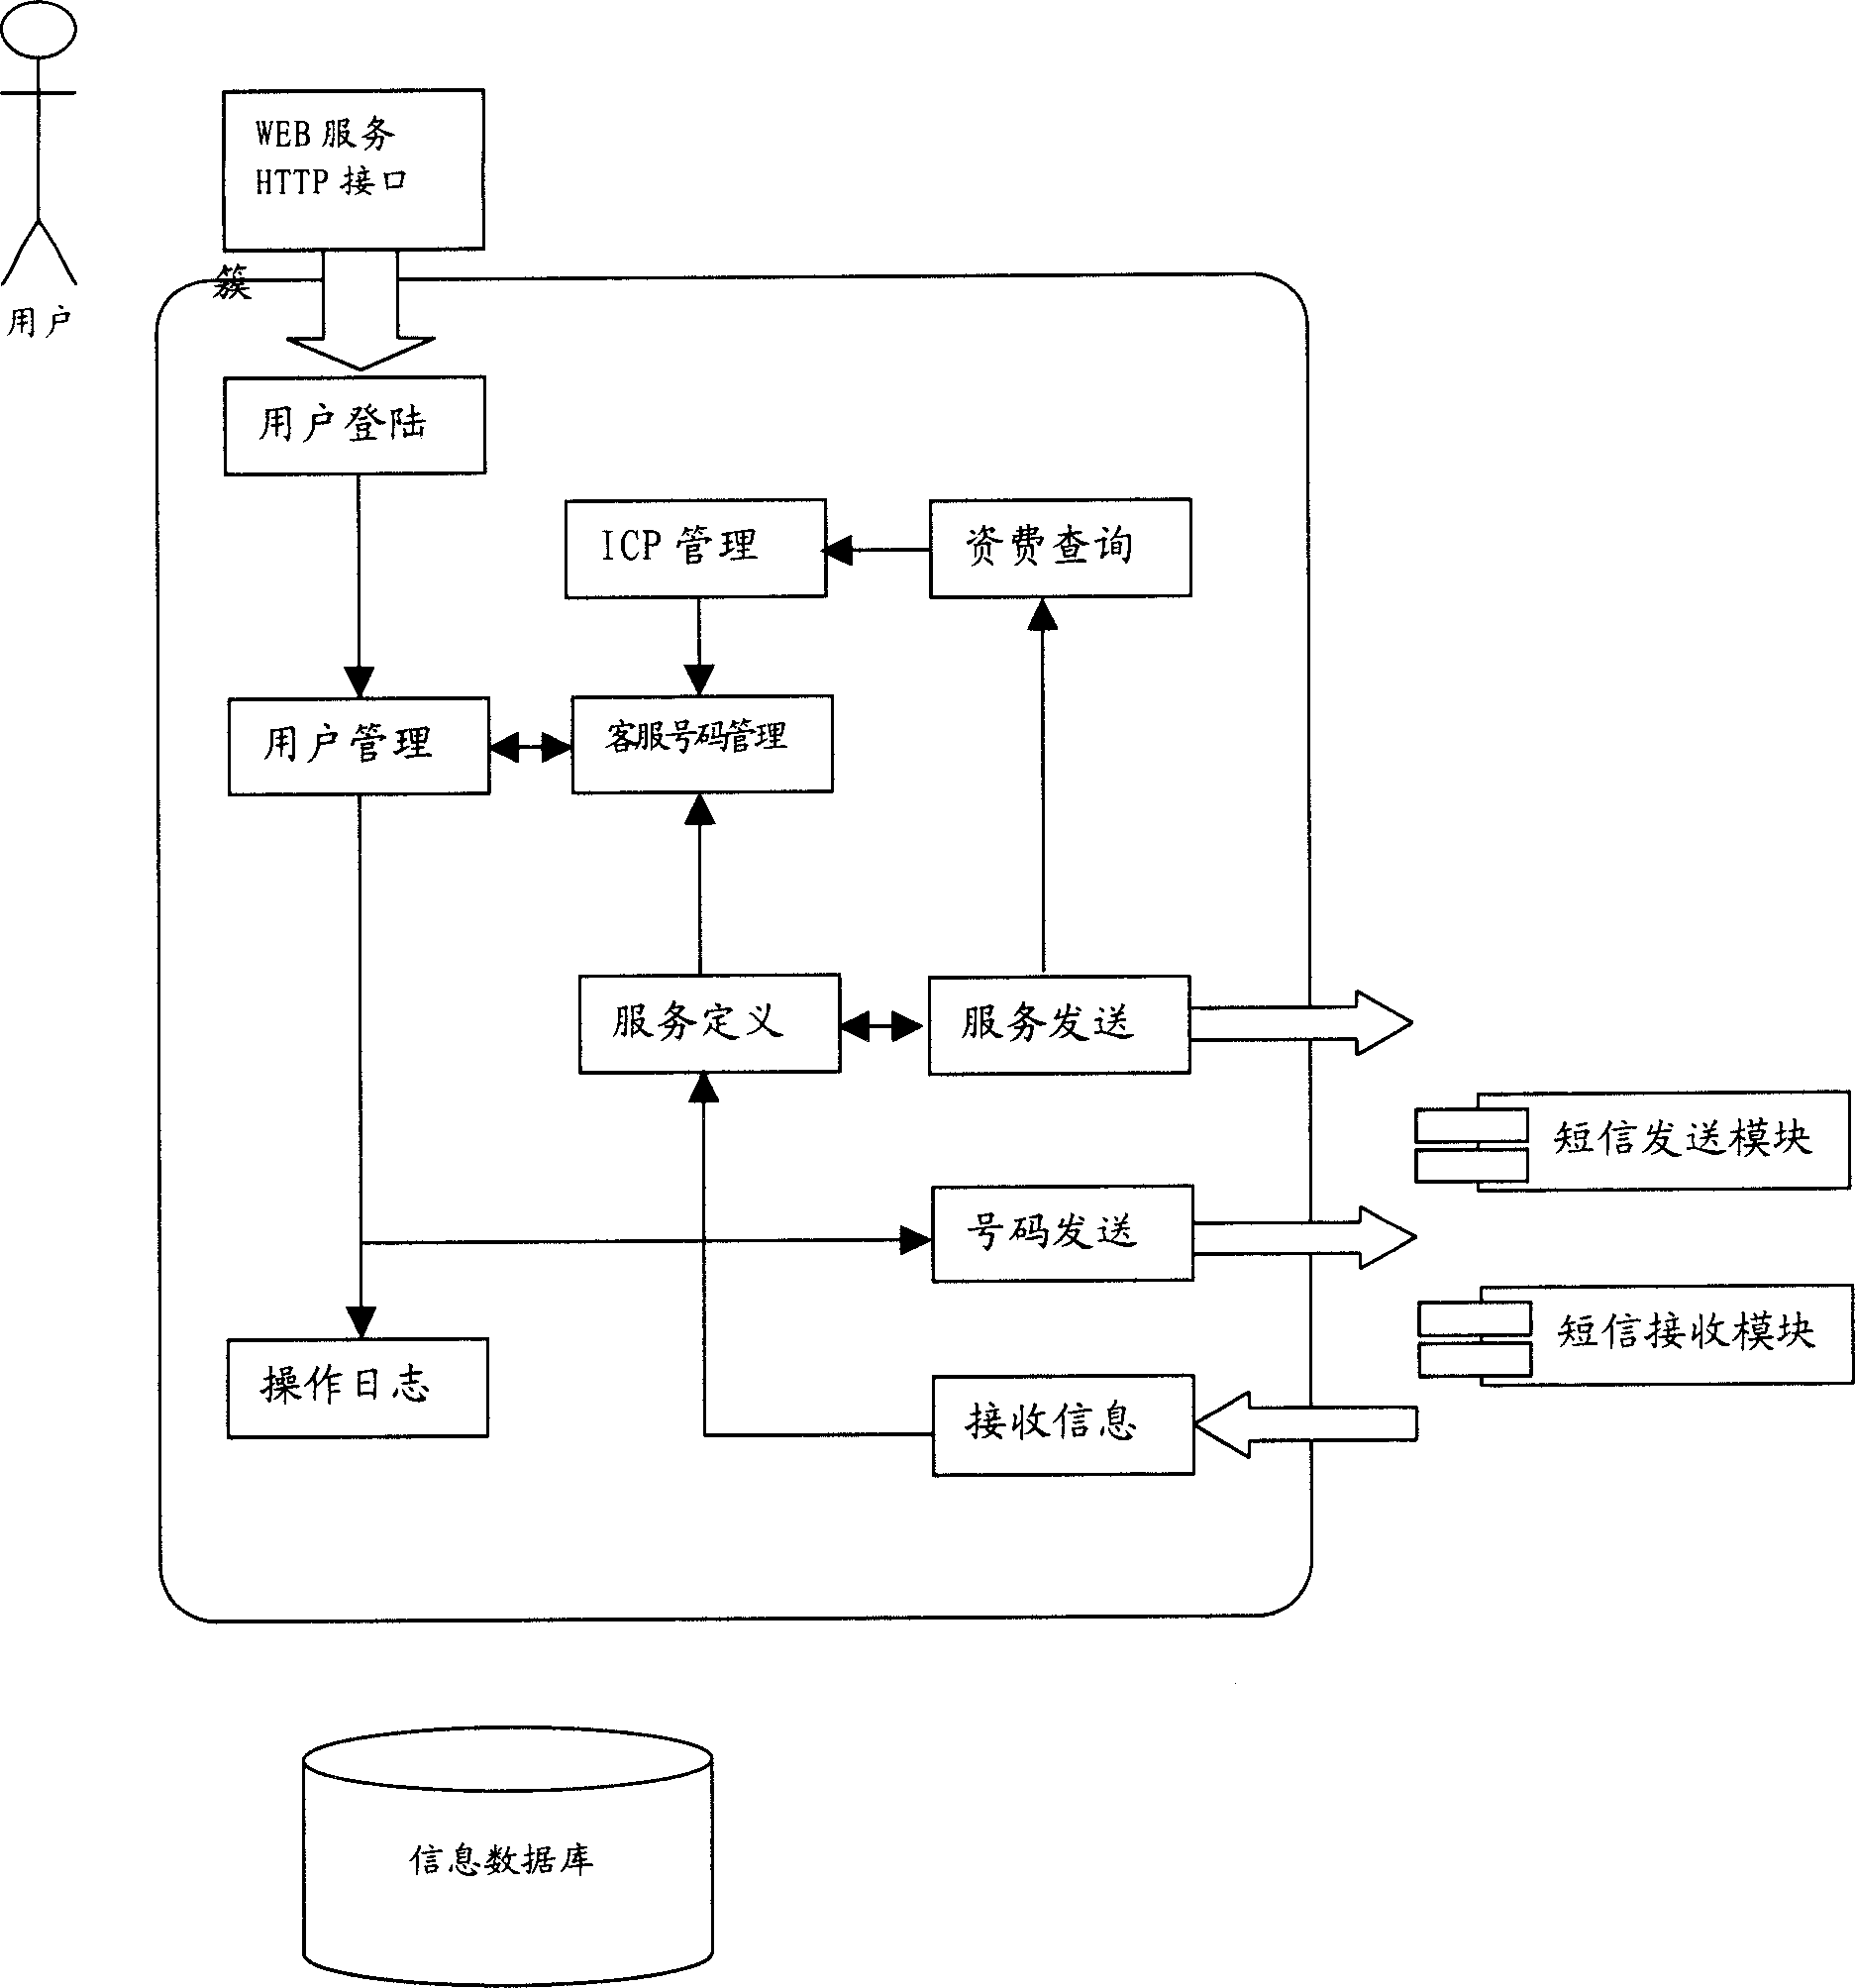 Follow-up system and method of hospital using short message